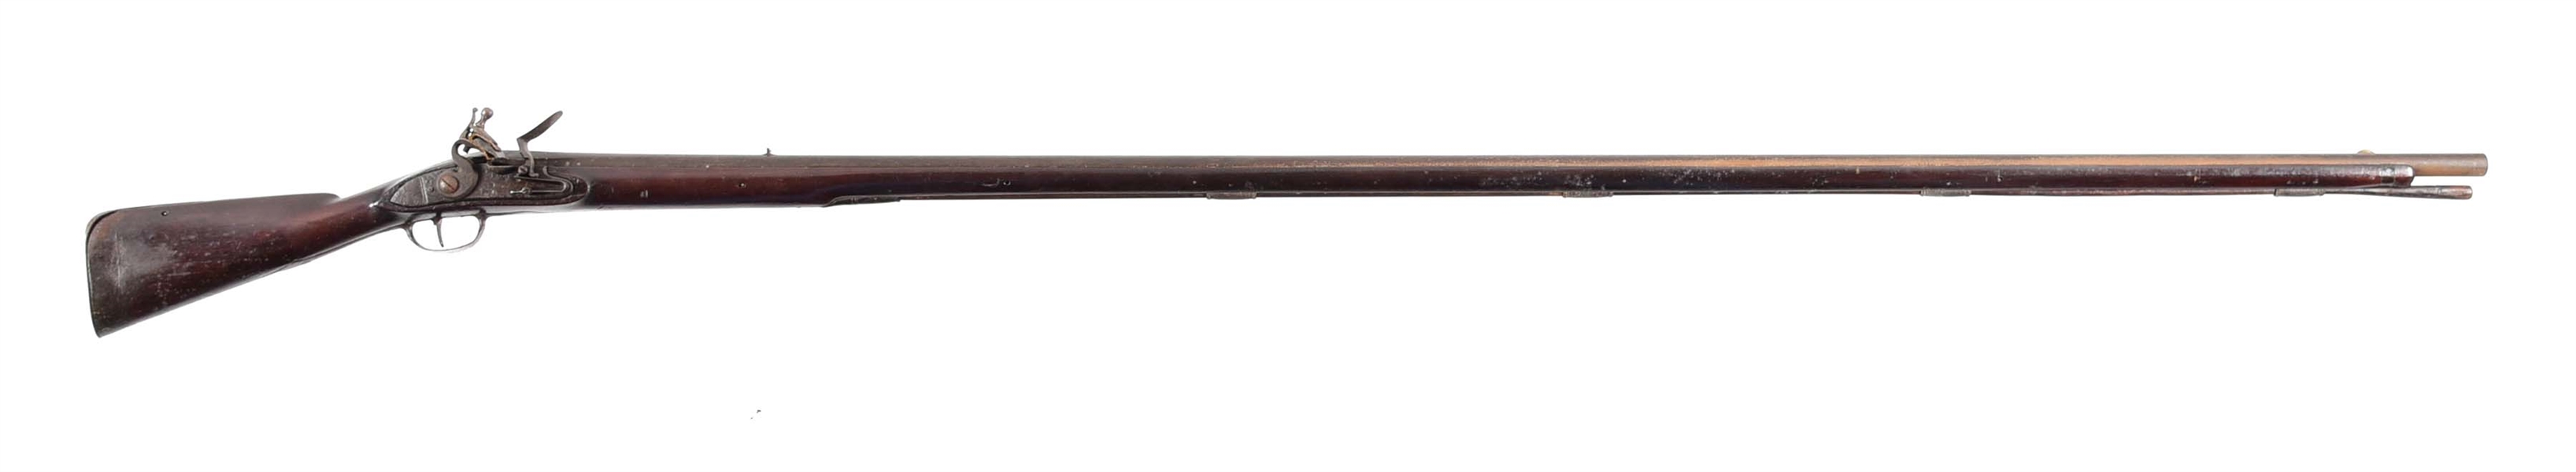 (A) AMERICAN REVOLUTIONARY WAR RAMPART OR WALL GUN STAMPED "SP" FOR NEW JERSEY.